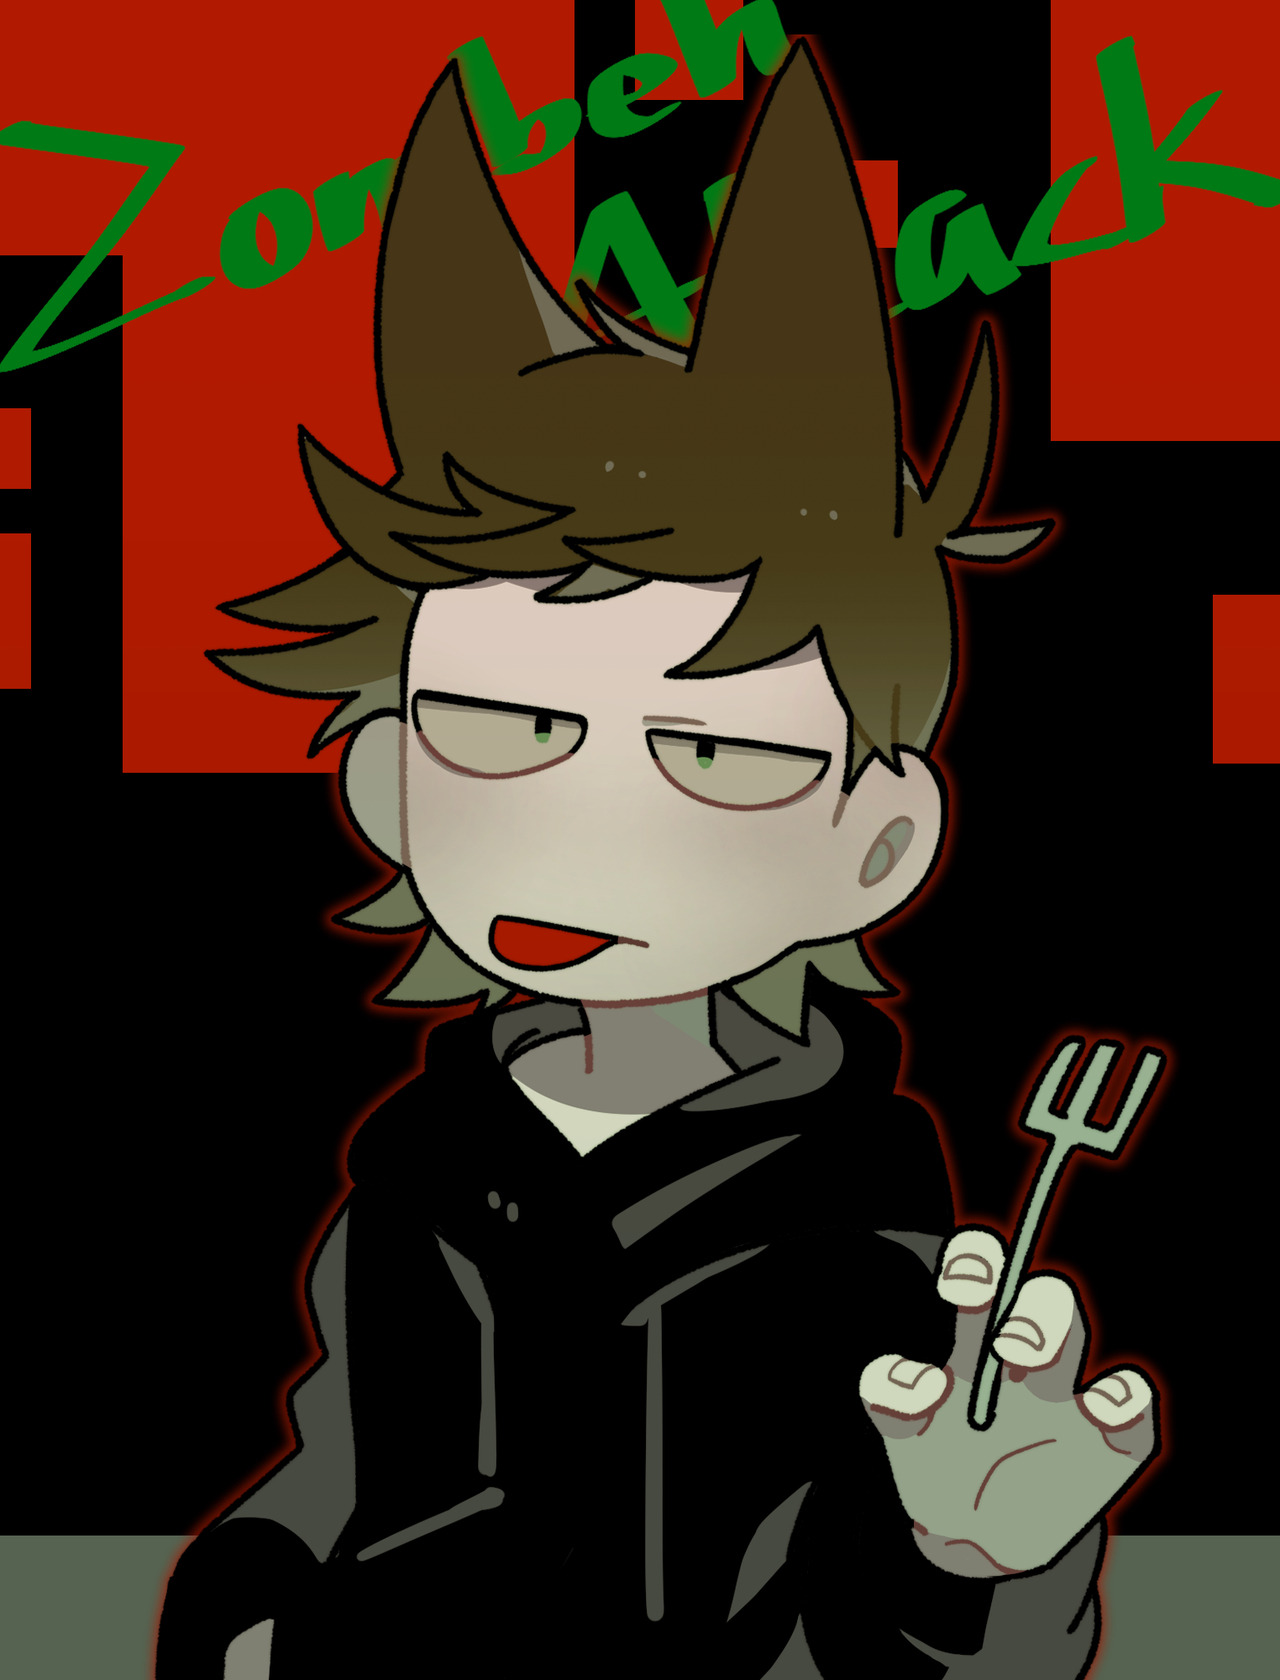 Tord Norin in Hello Kitty style/Traumacore style by T0rd-Norin on DeviantArt